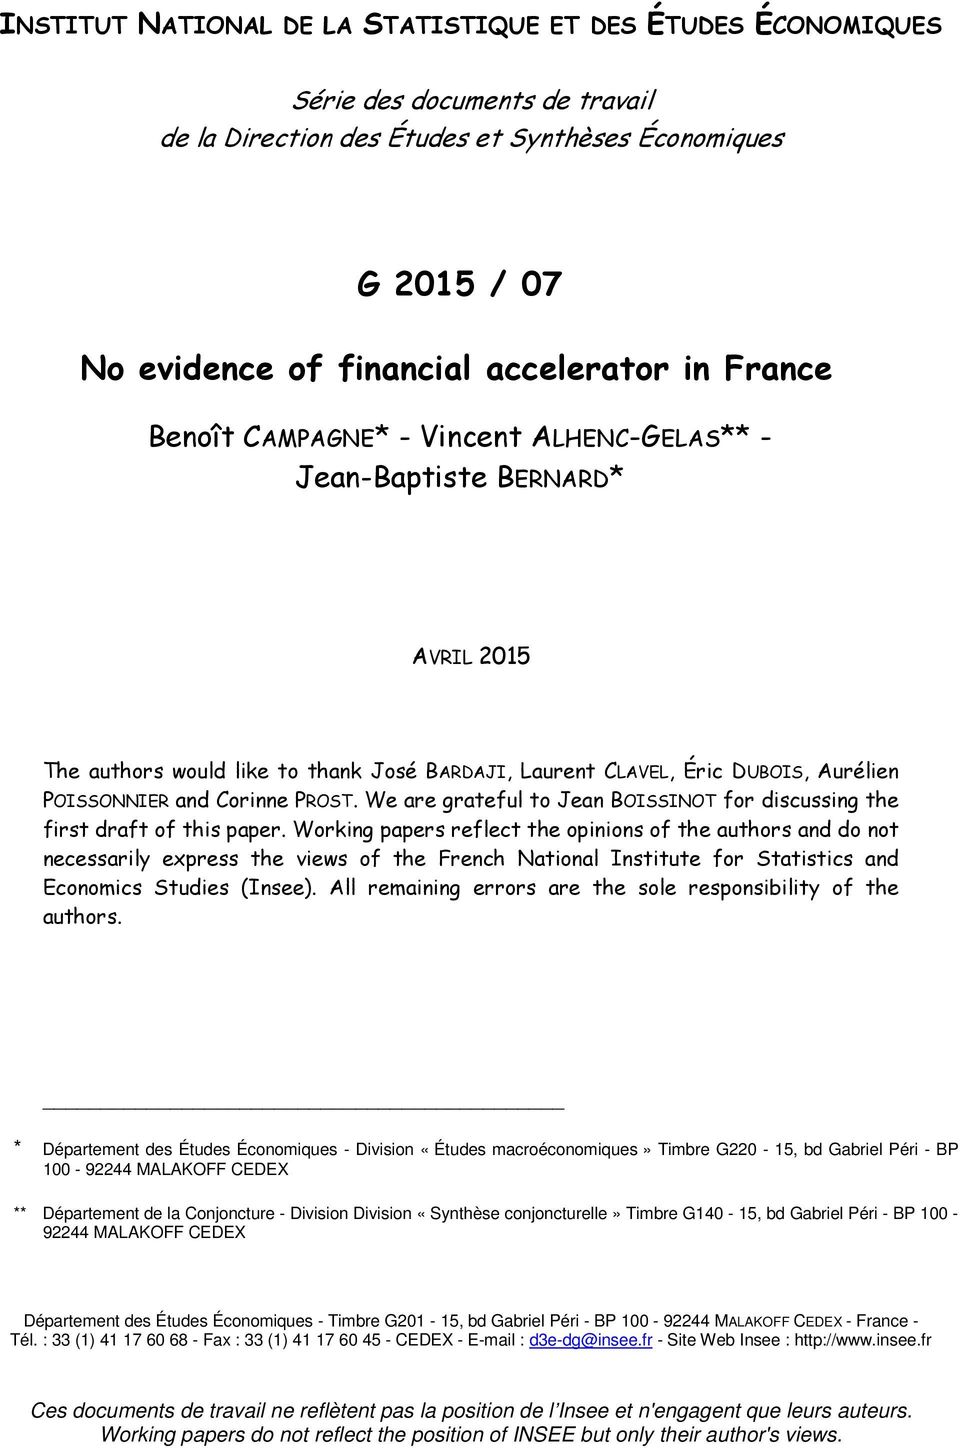 We are grateful to Jean BOISSINOT for discussing the first draft of this paper.